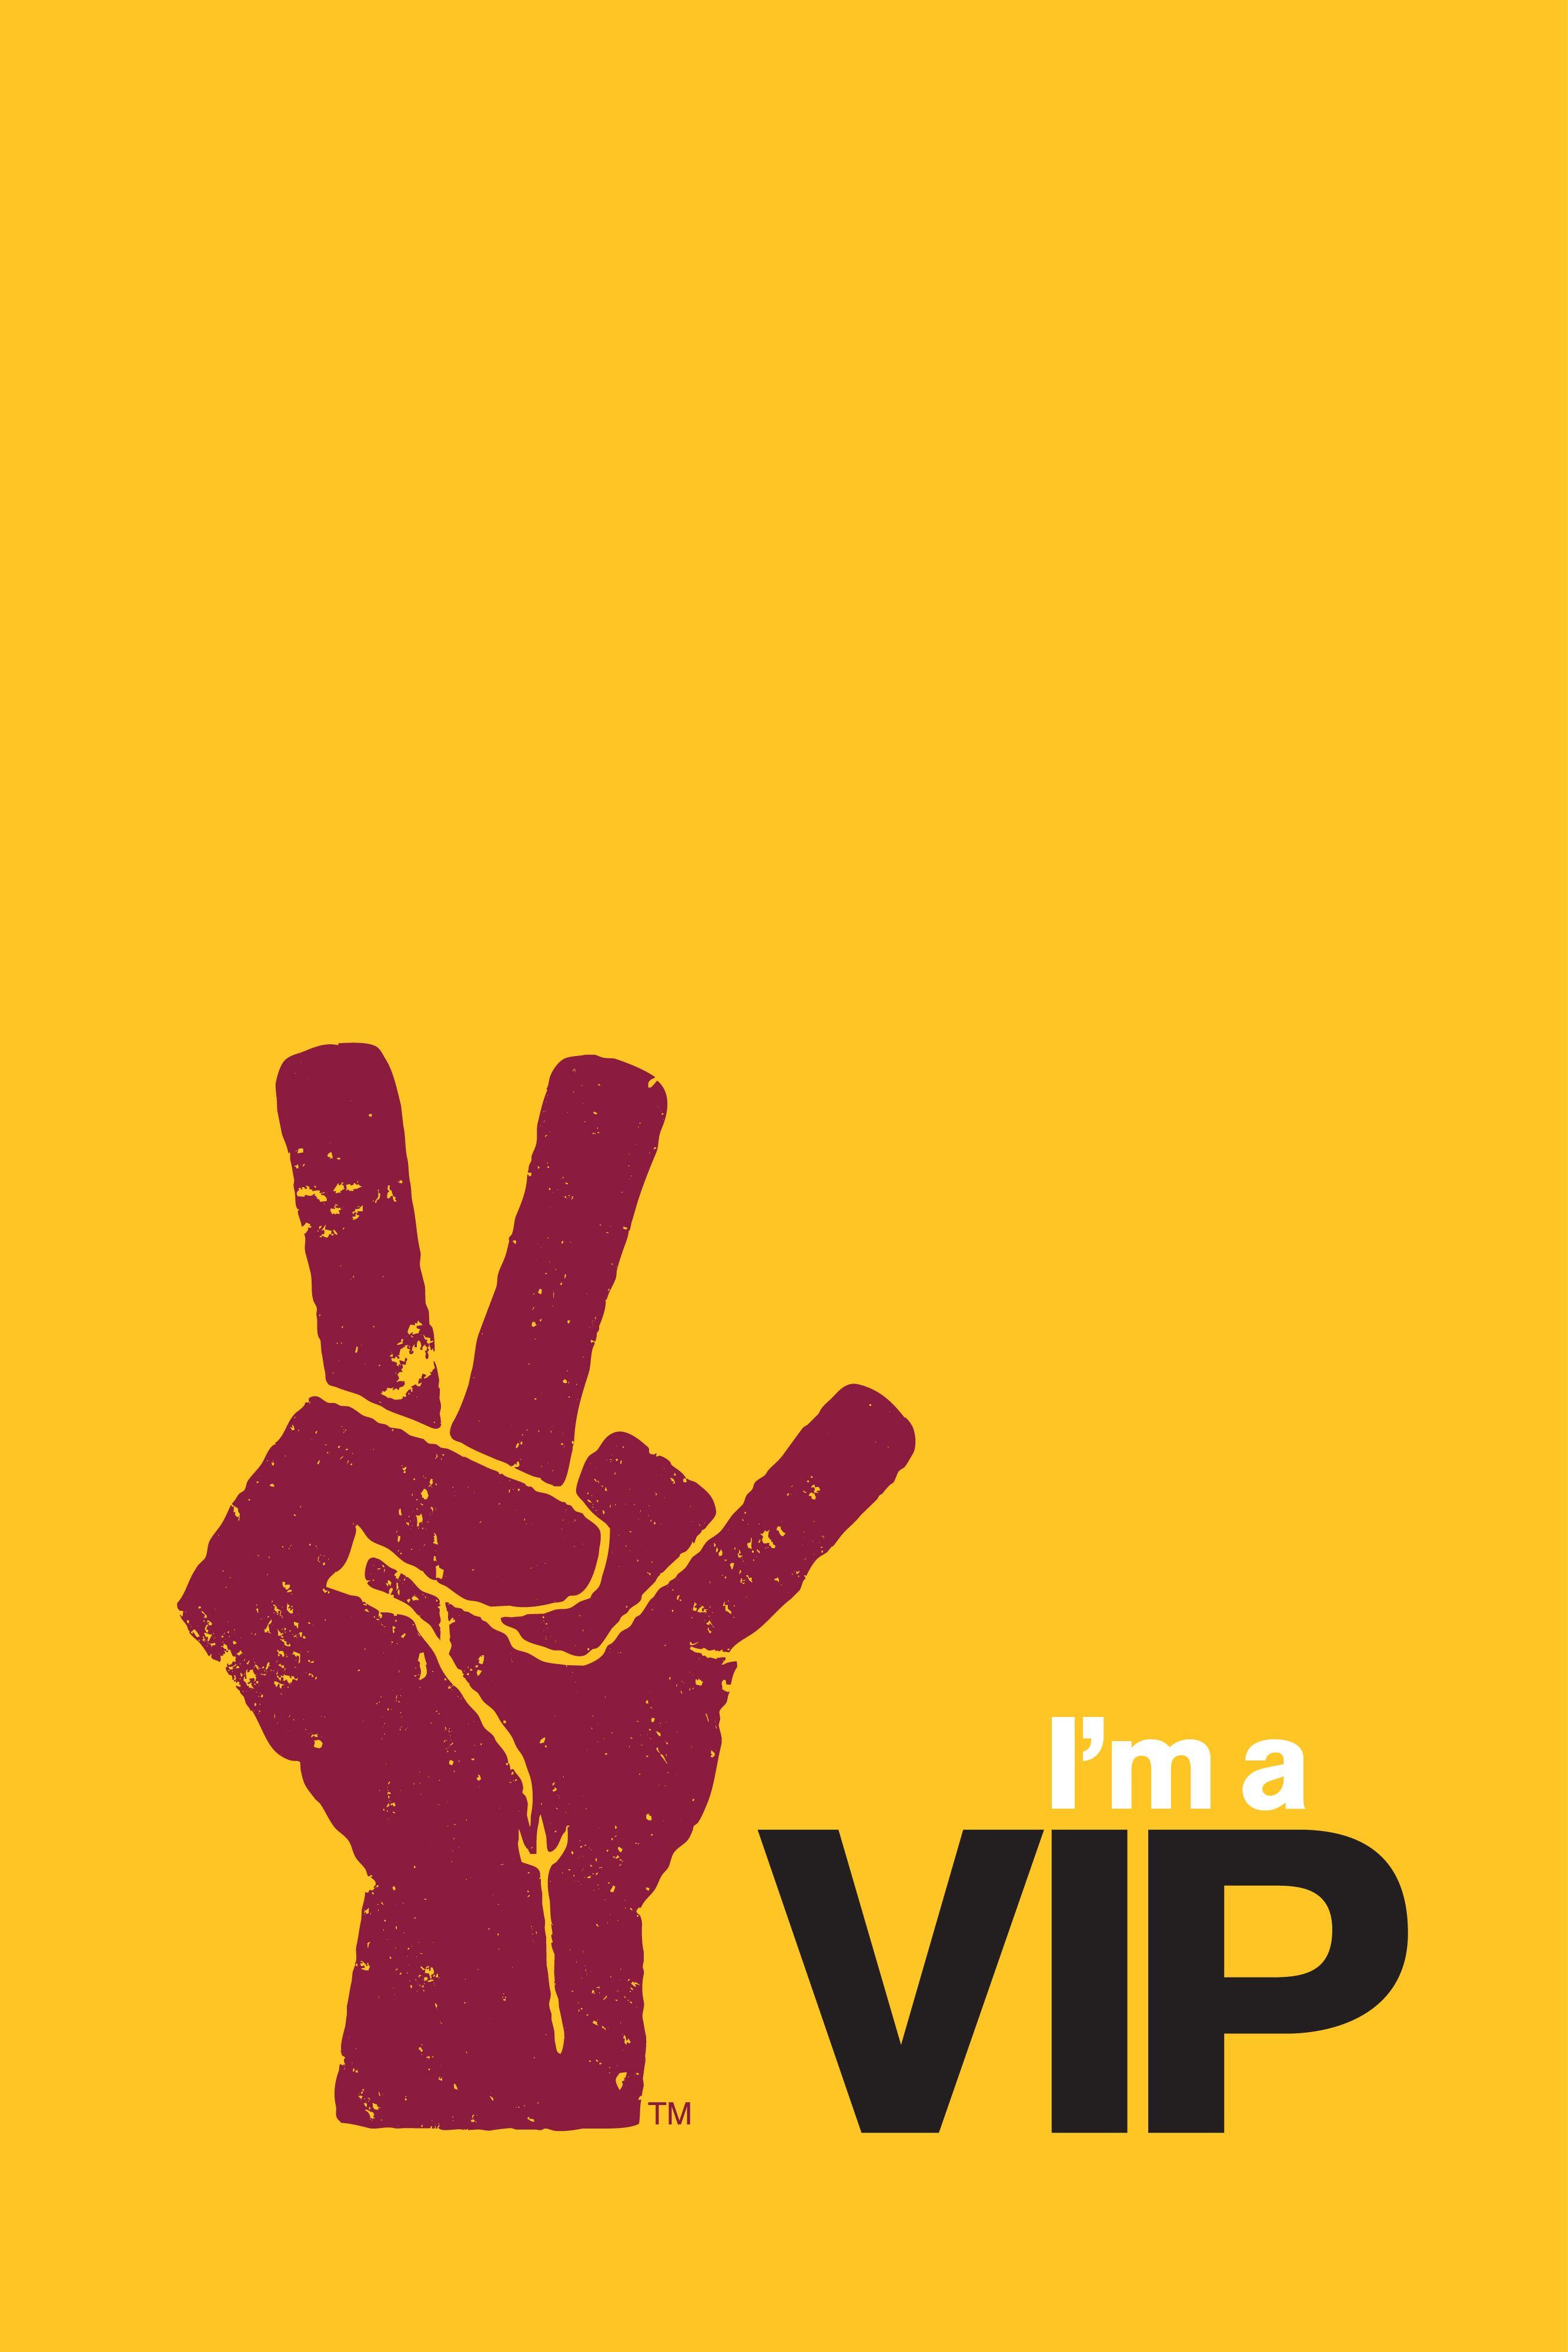 VIP Background. ASU Students Site